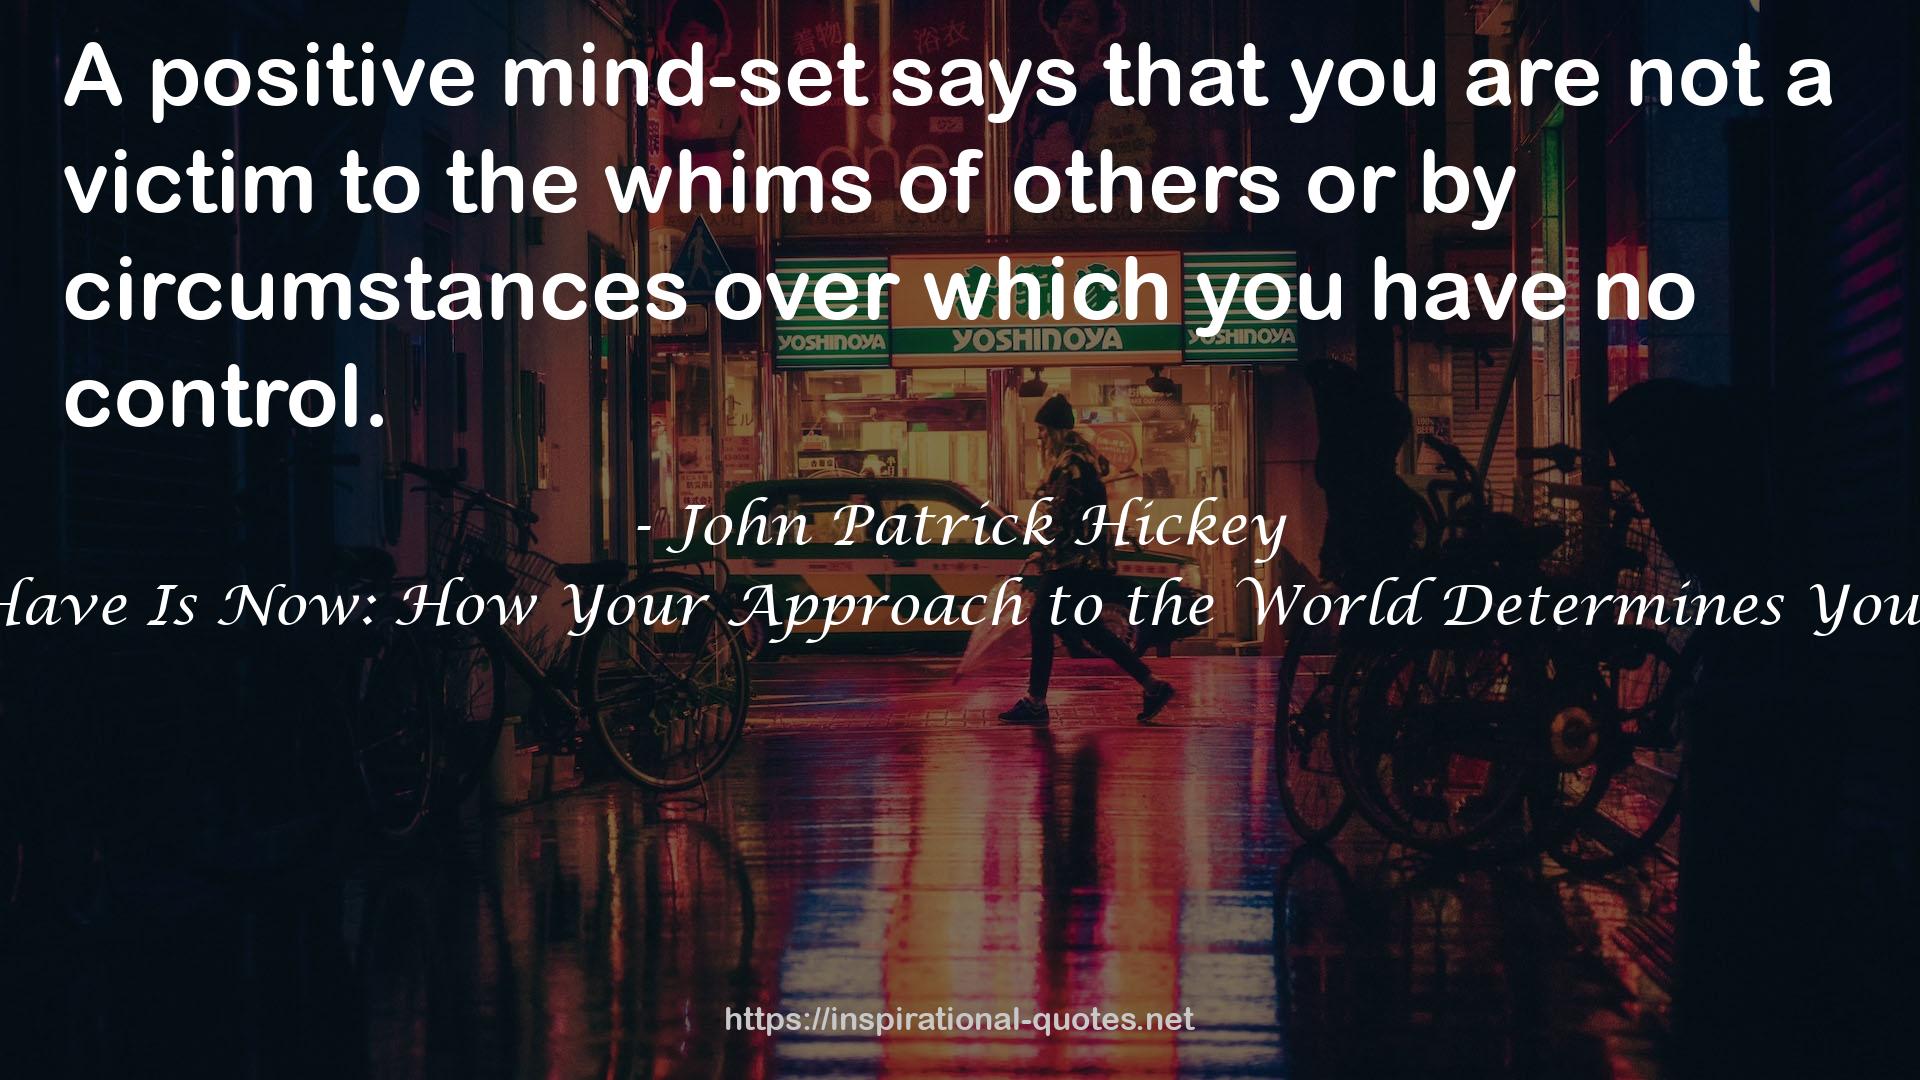 All You Have Is Now: How Your Approach to the World Determines Your Destiny QUOTES